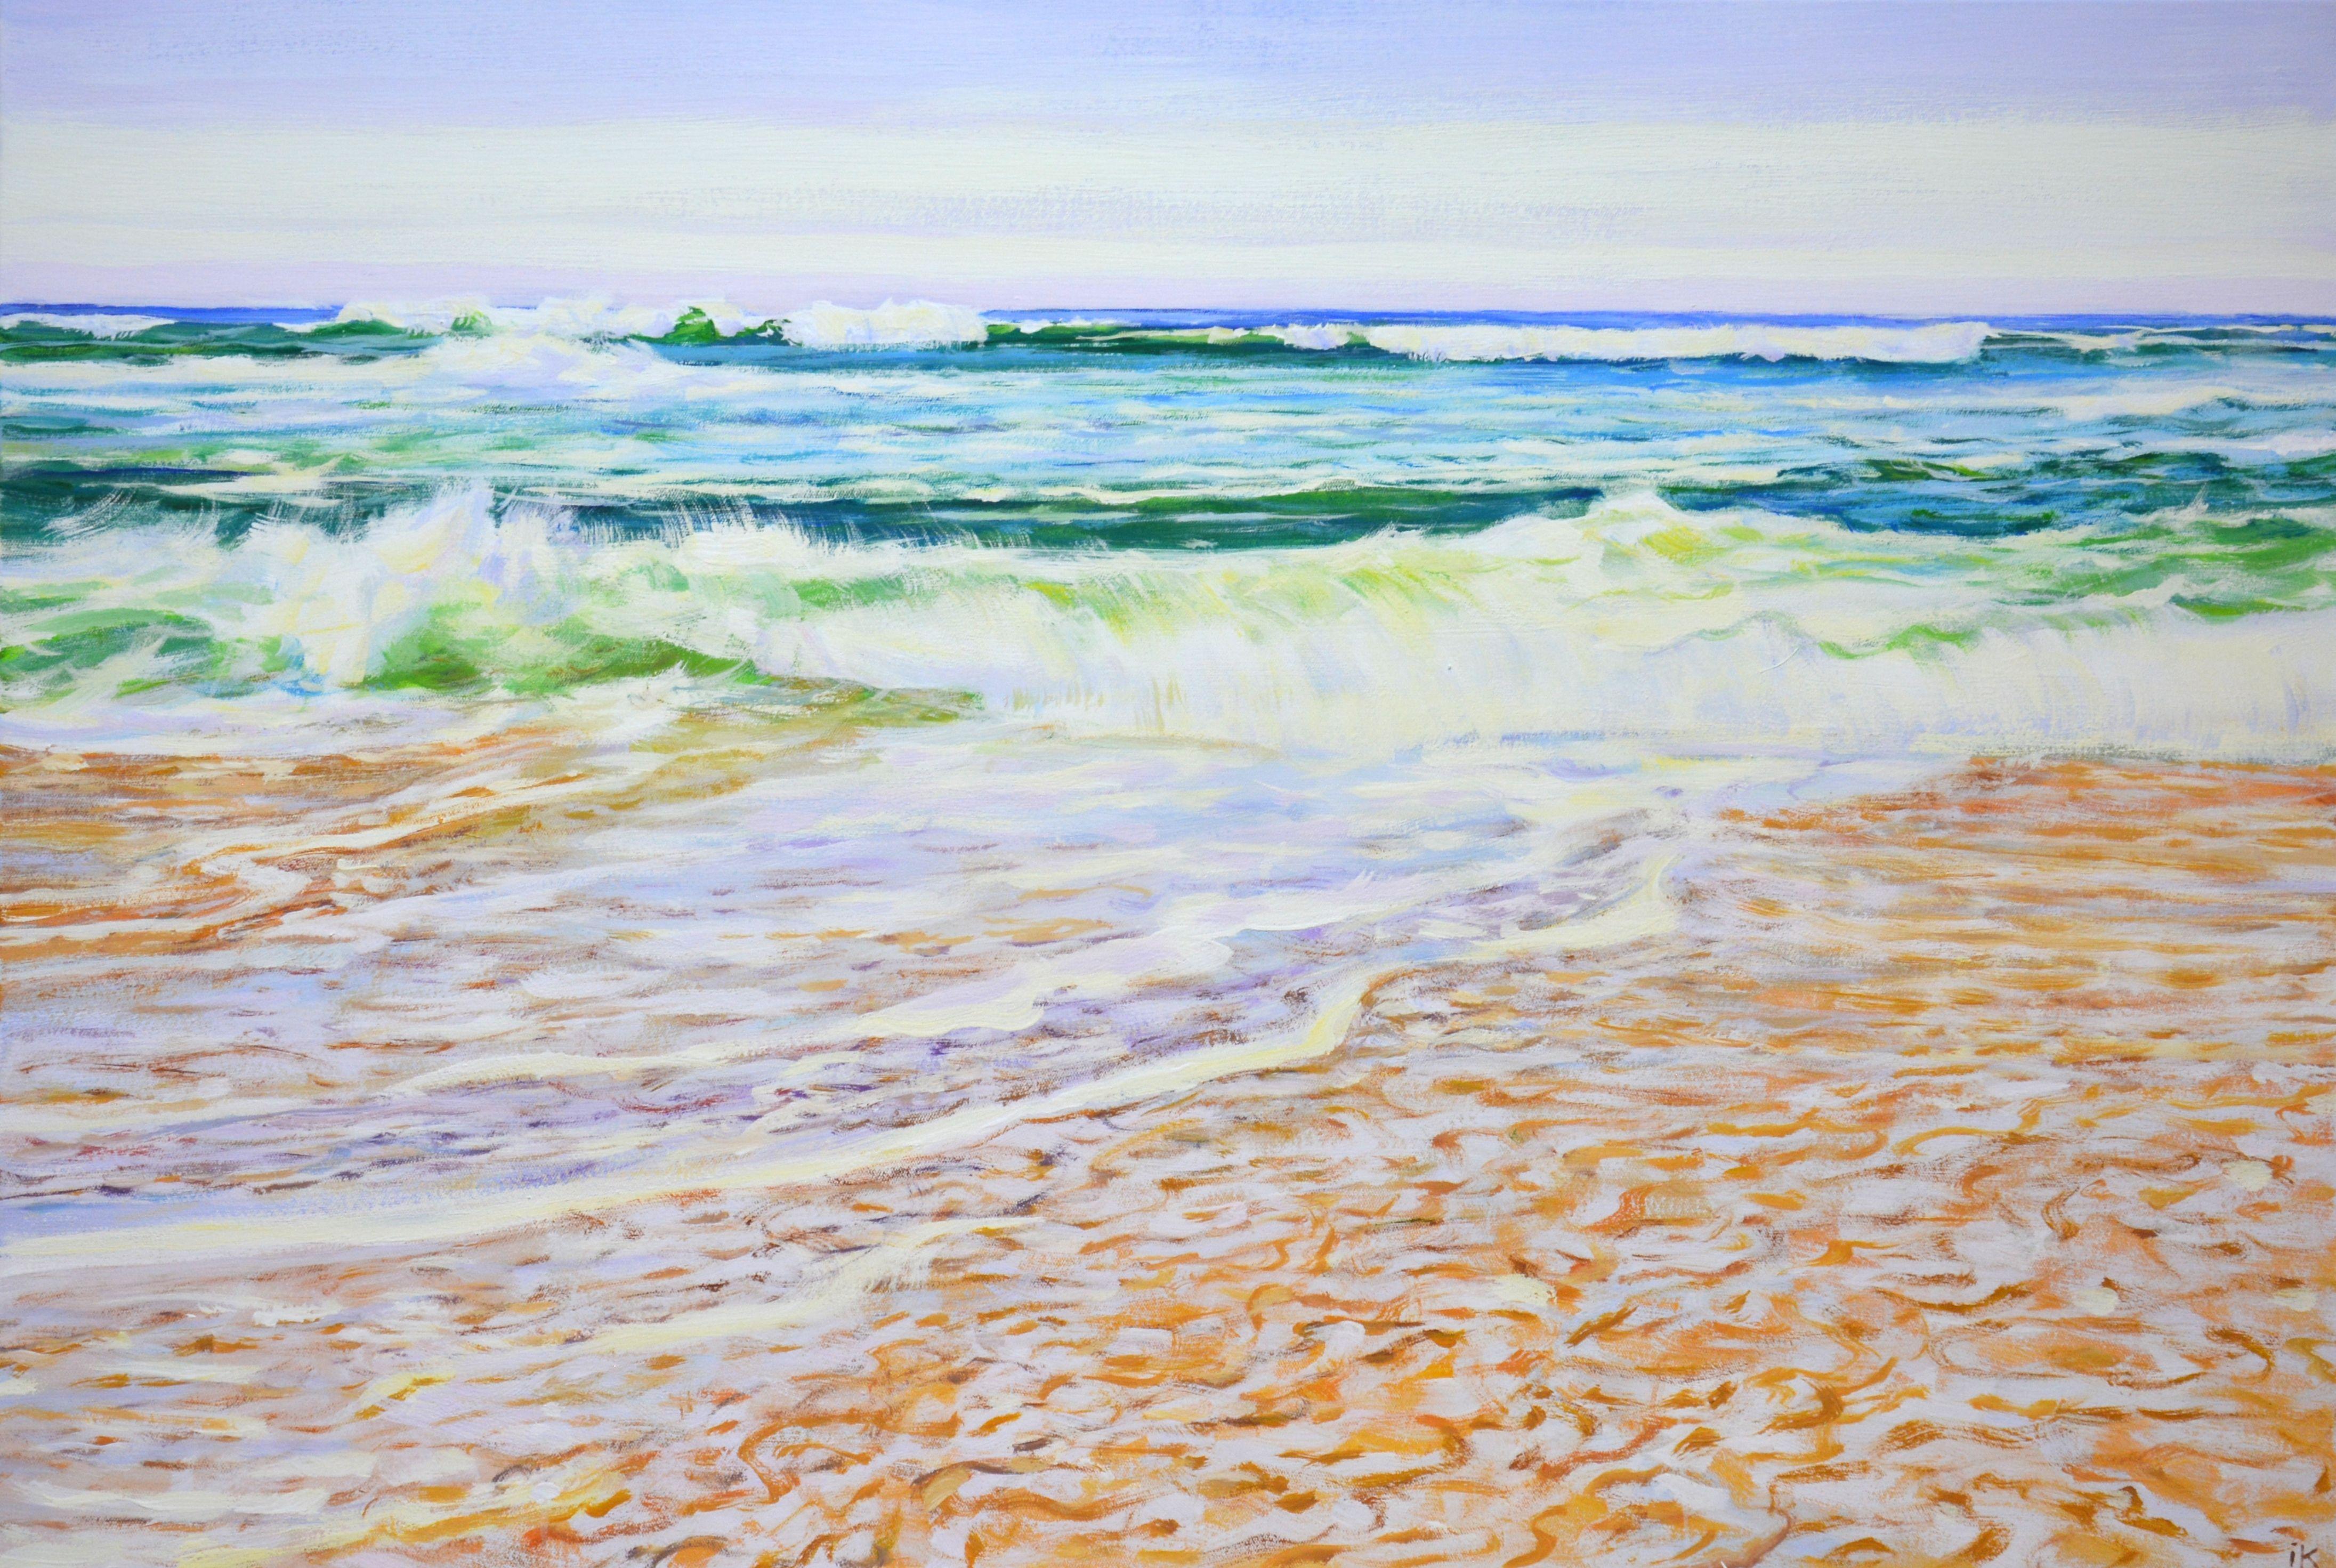 The work Inspiration by the Ocean is written in one go. Nature: seascape, clear sky over the ocean, light reflected from the incoming waves, sea foam create an atmosphere of relaxation. A rich palette of blue, green, golden, white colors emphasizes